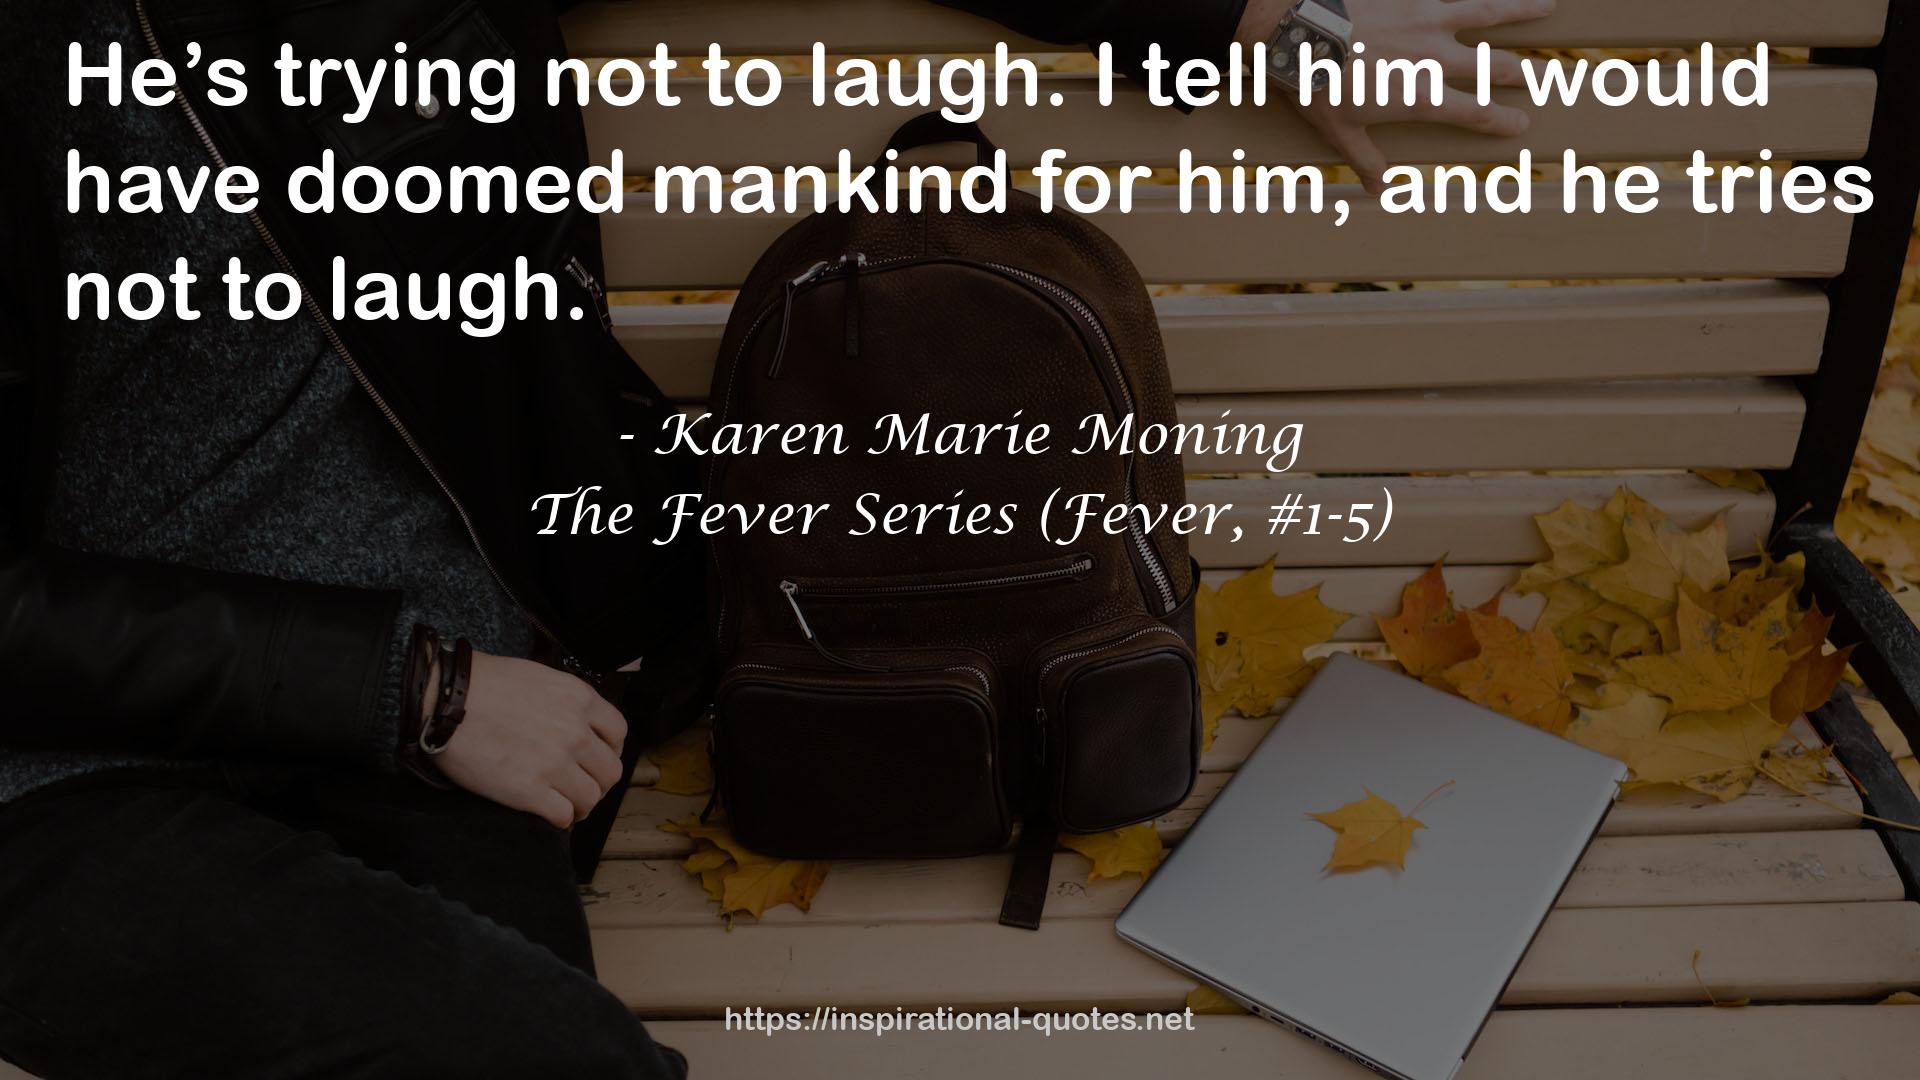 The Fever Series (Fever, #1-5) QUOTES